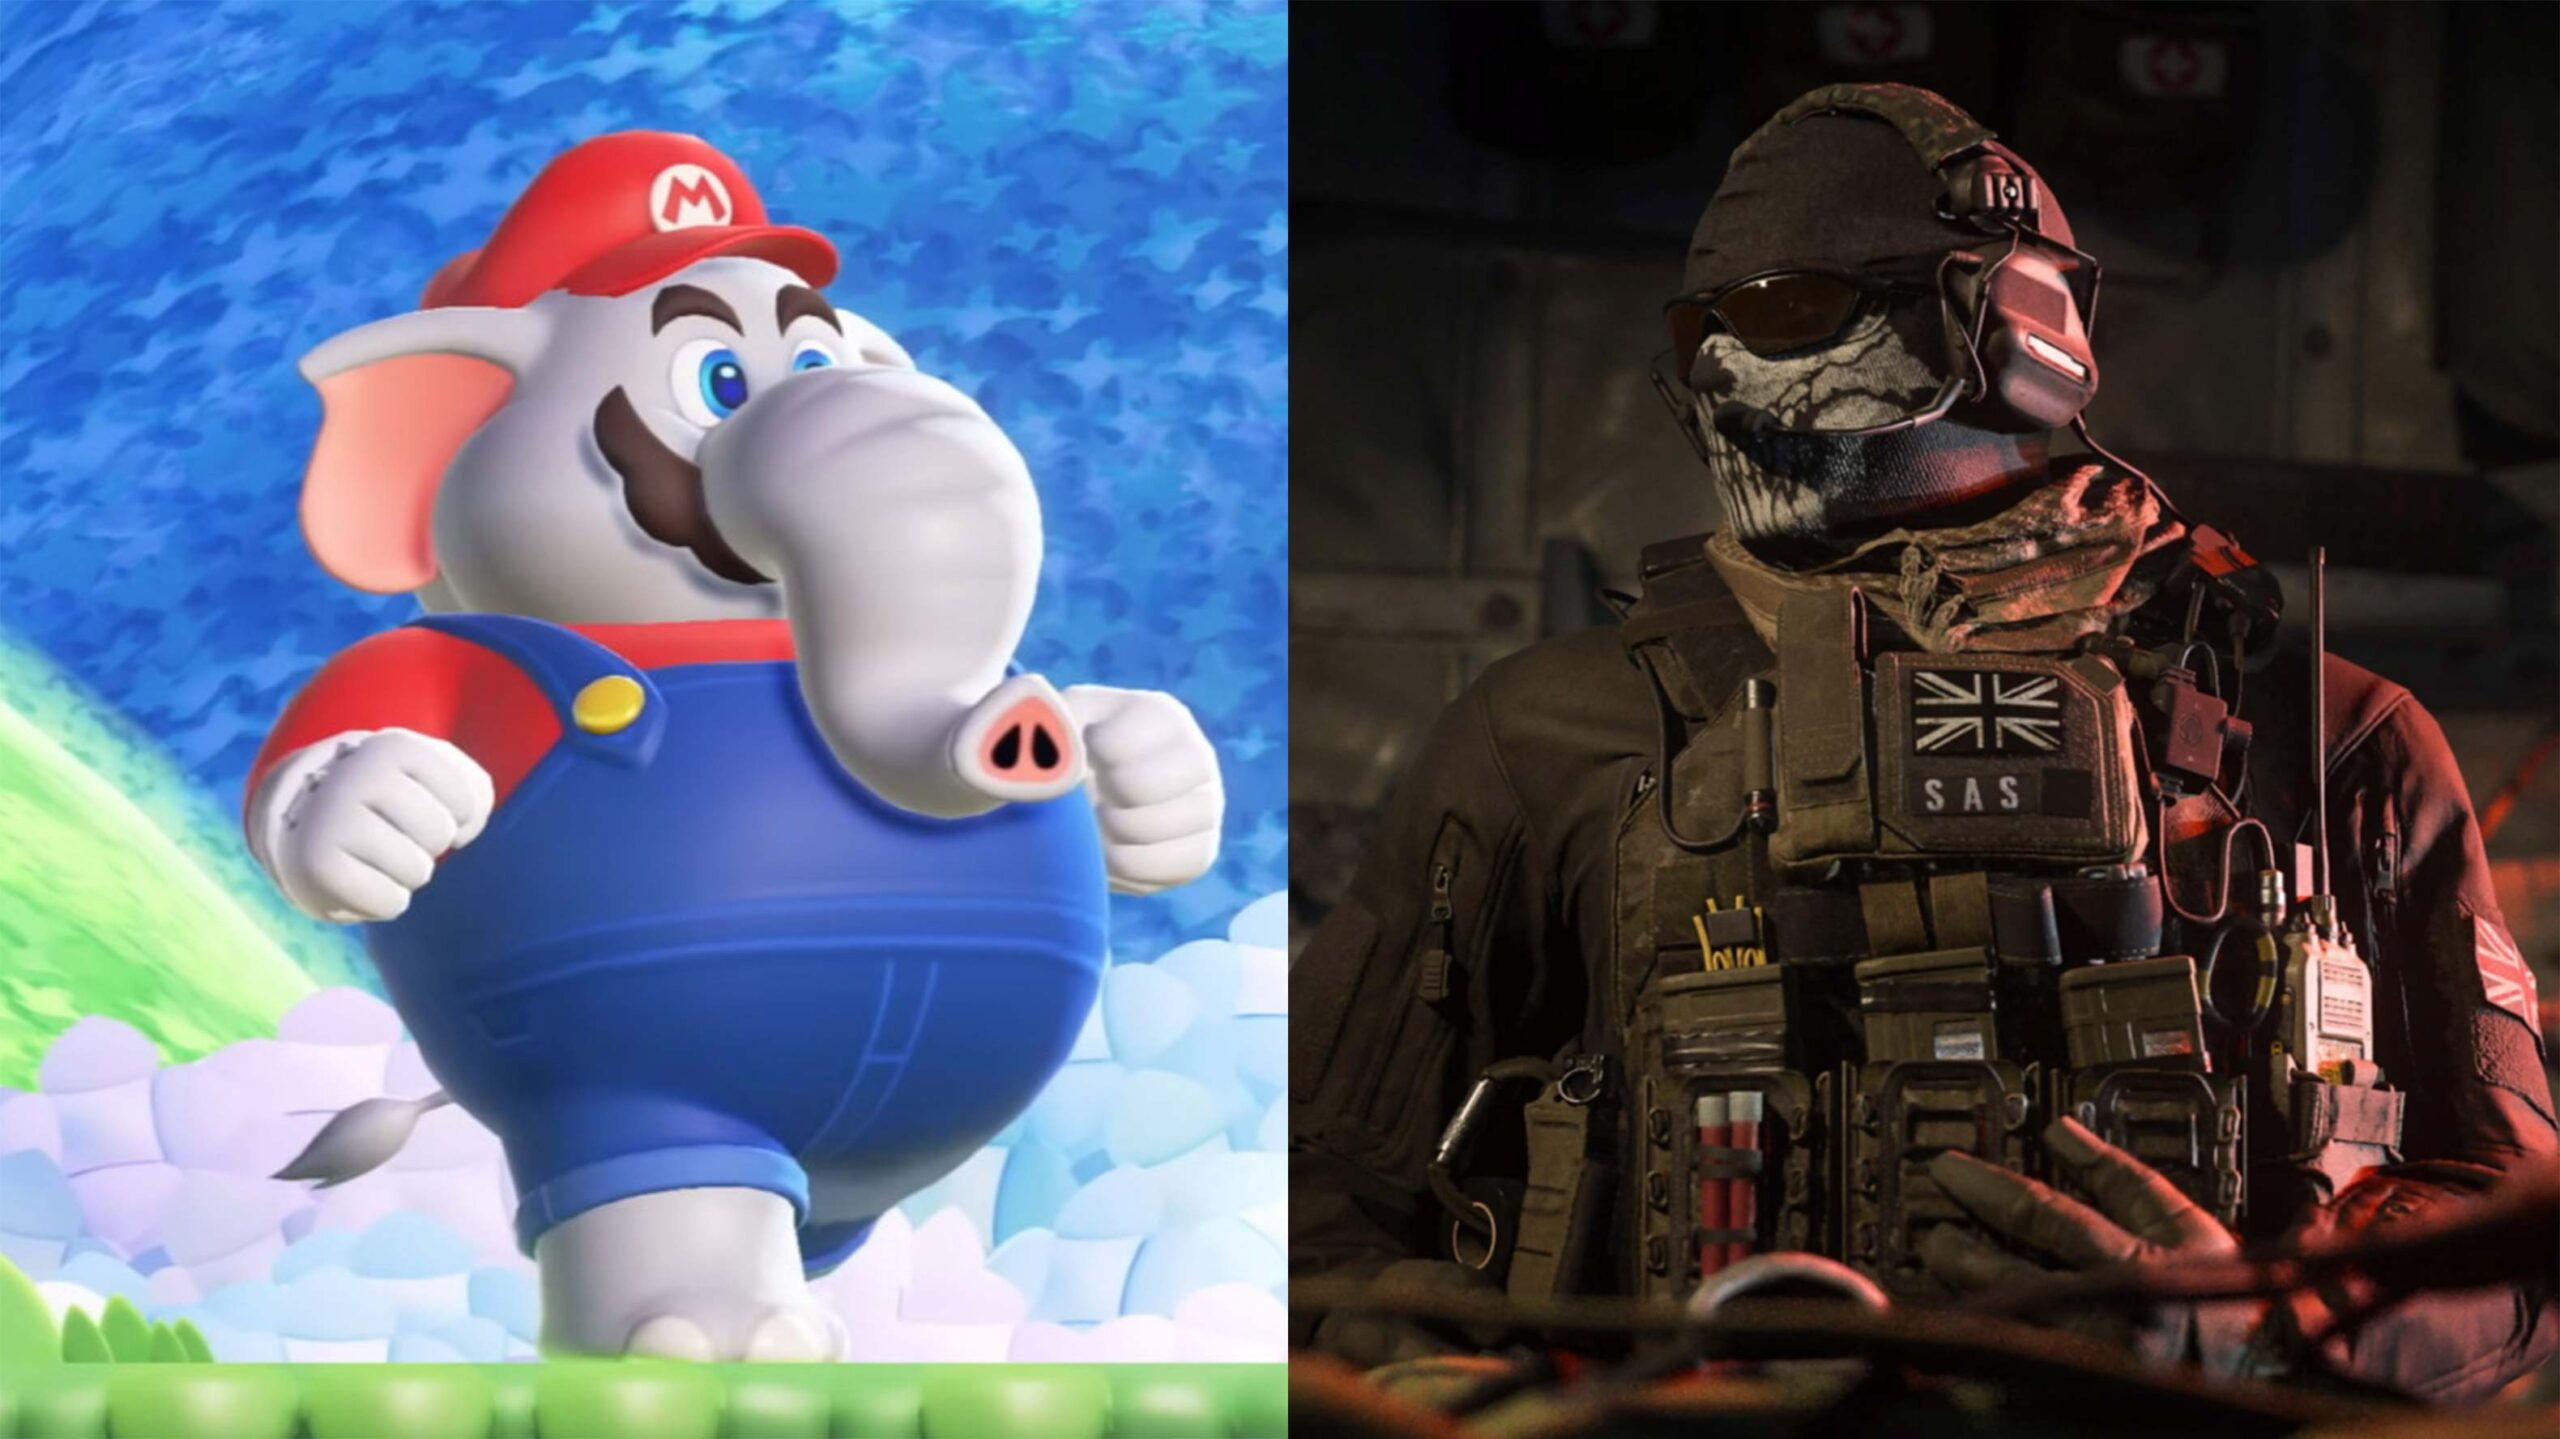 Elephant Mario and Call of Duty's Ghost